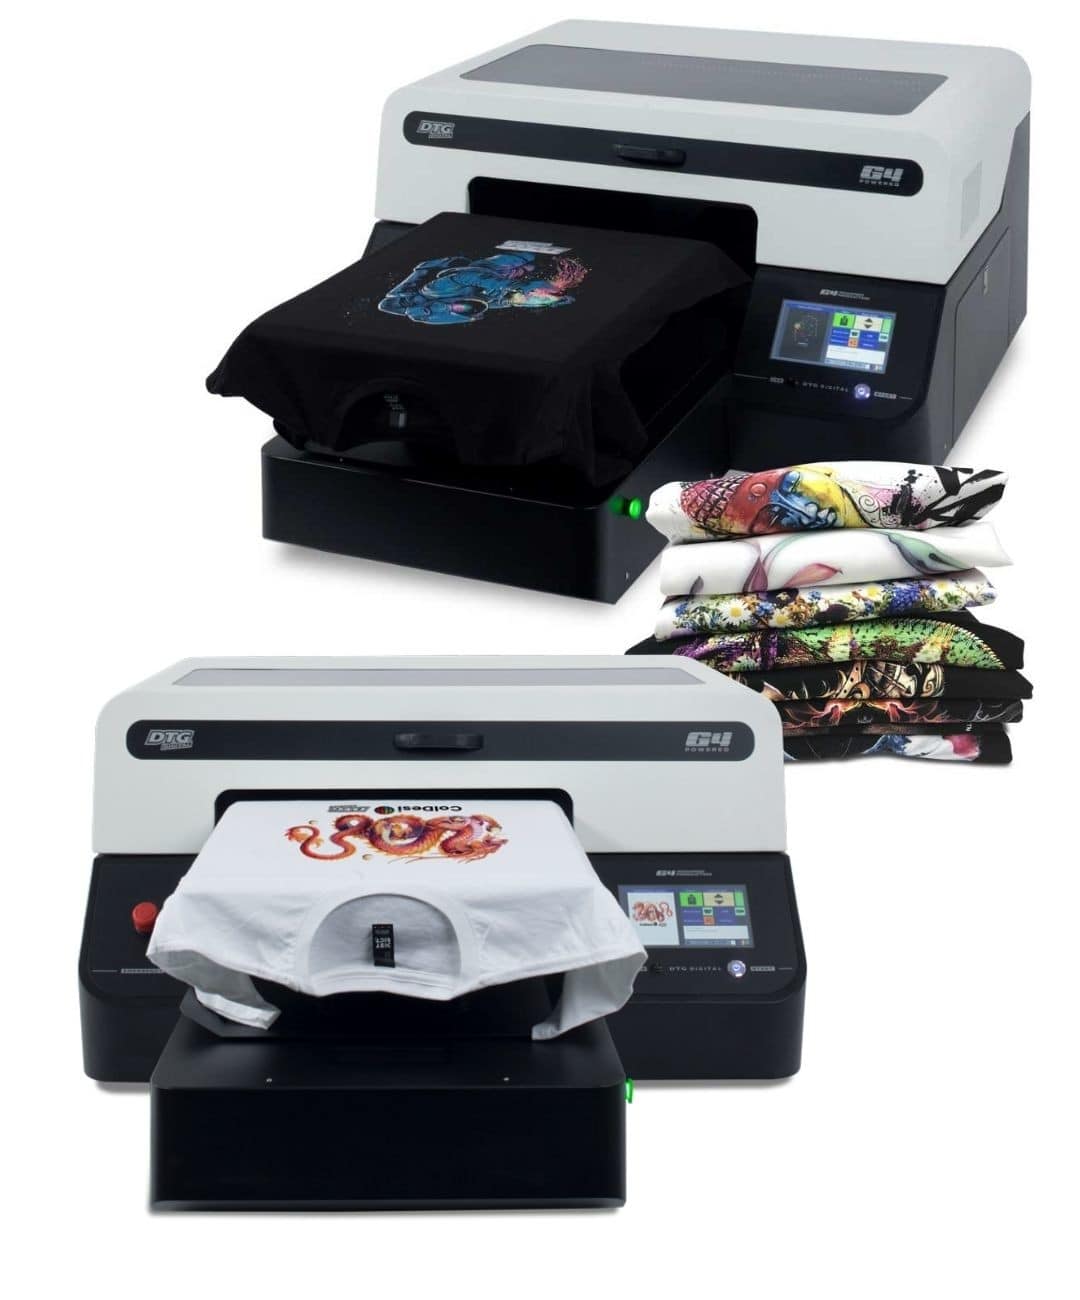 Printers for T Shirts the Best Type to Choose? - DTG Printer Machine